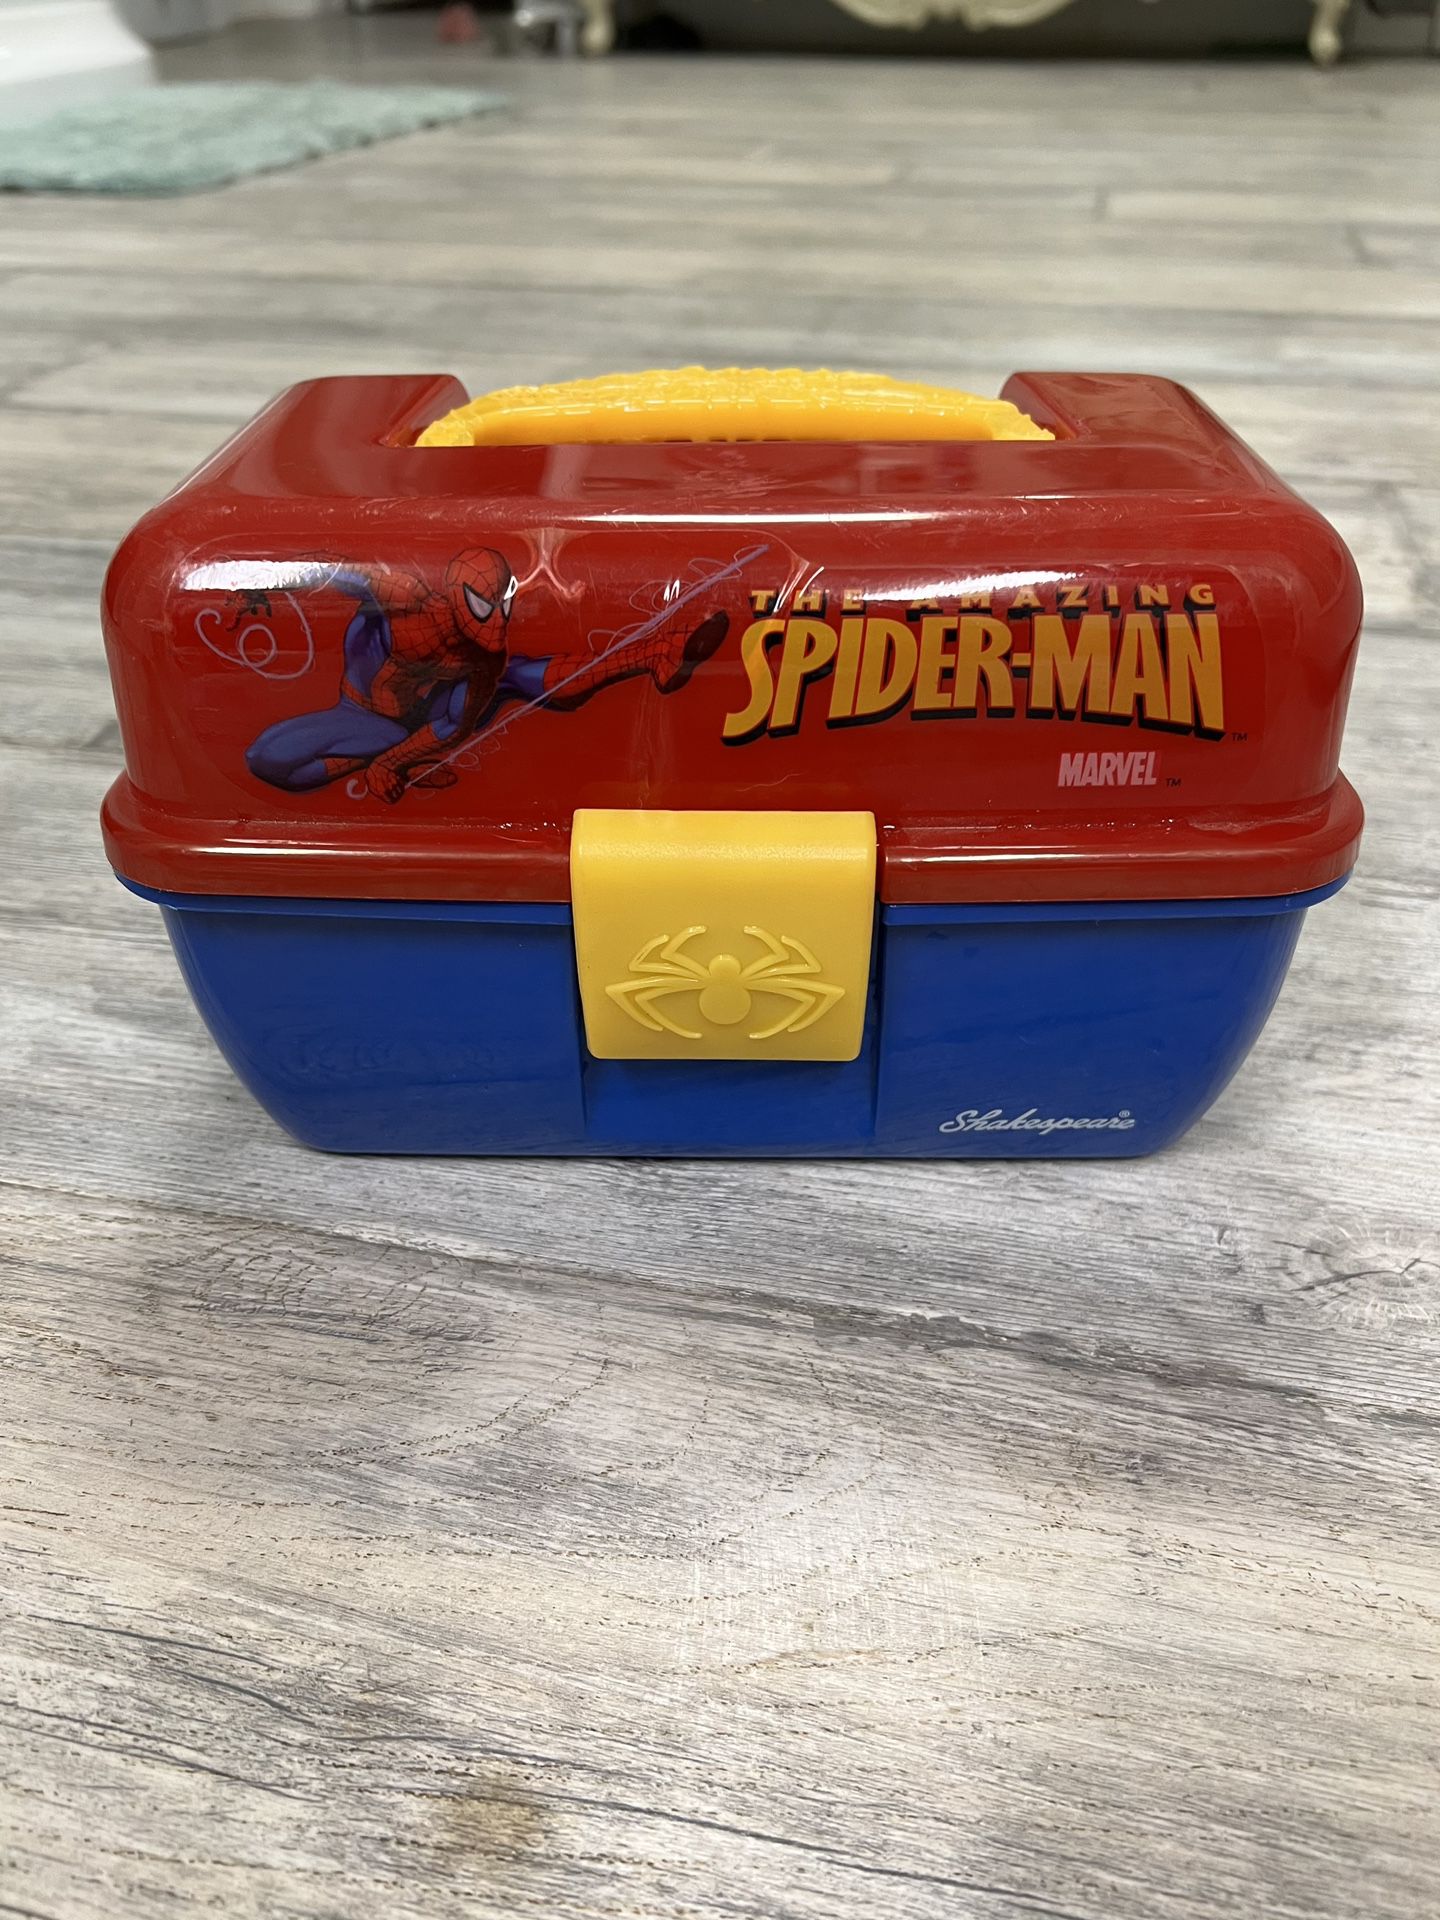 SHAKESPEARE SPIDERMAN FISHING TACKLE/PLAY BOX, BLUE/RED